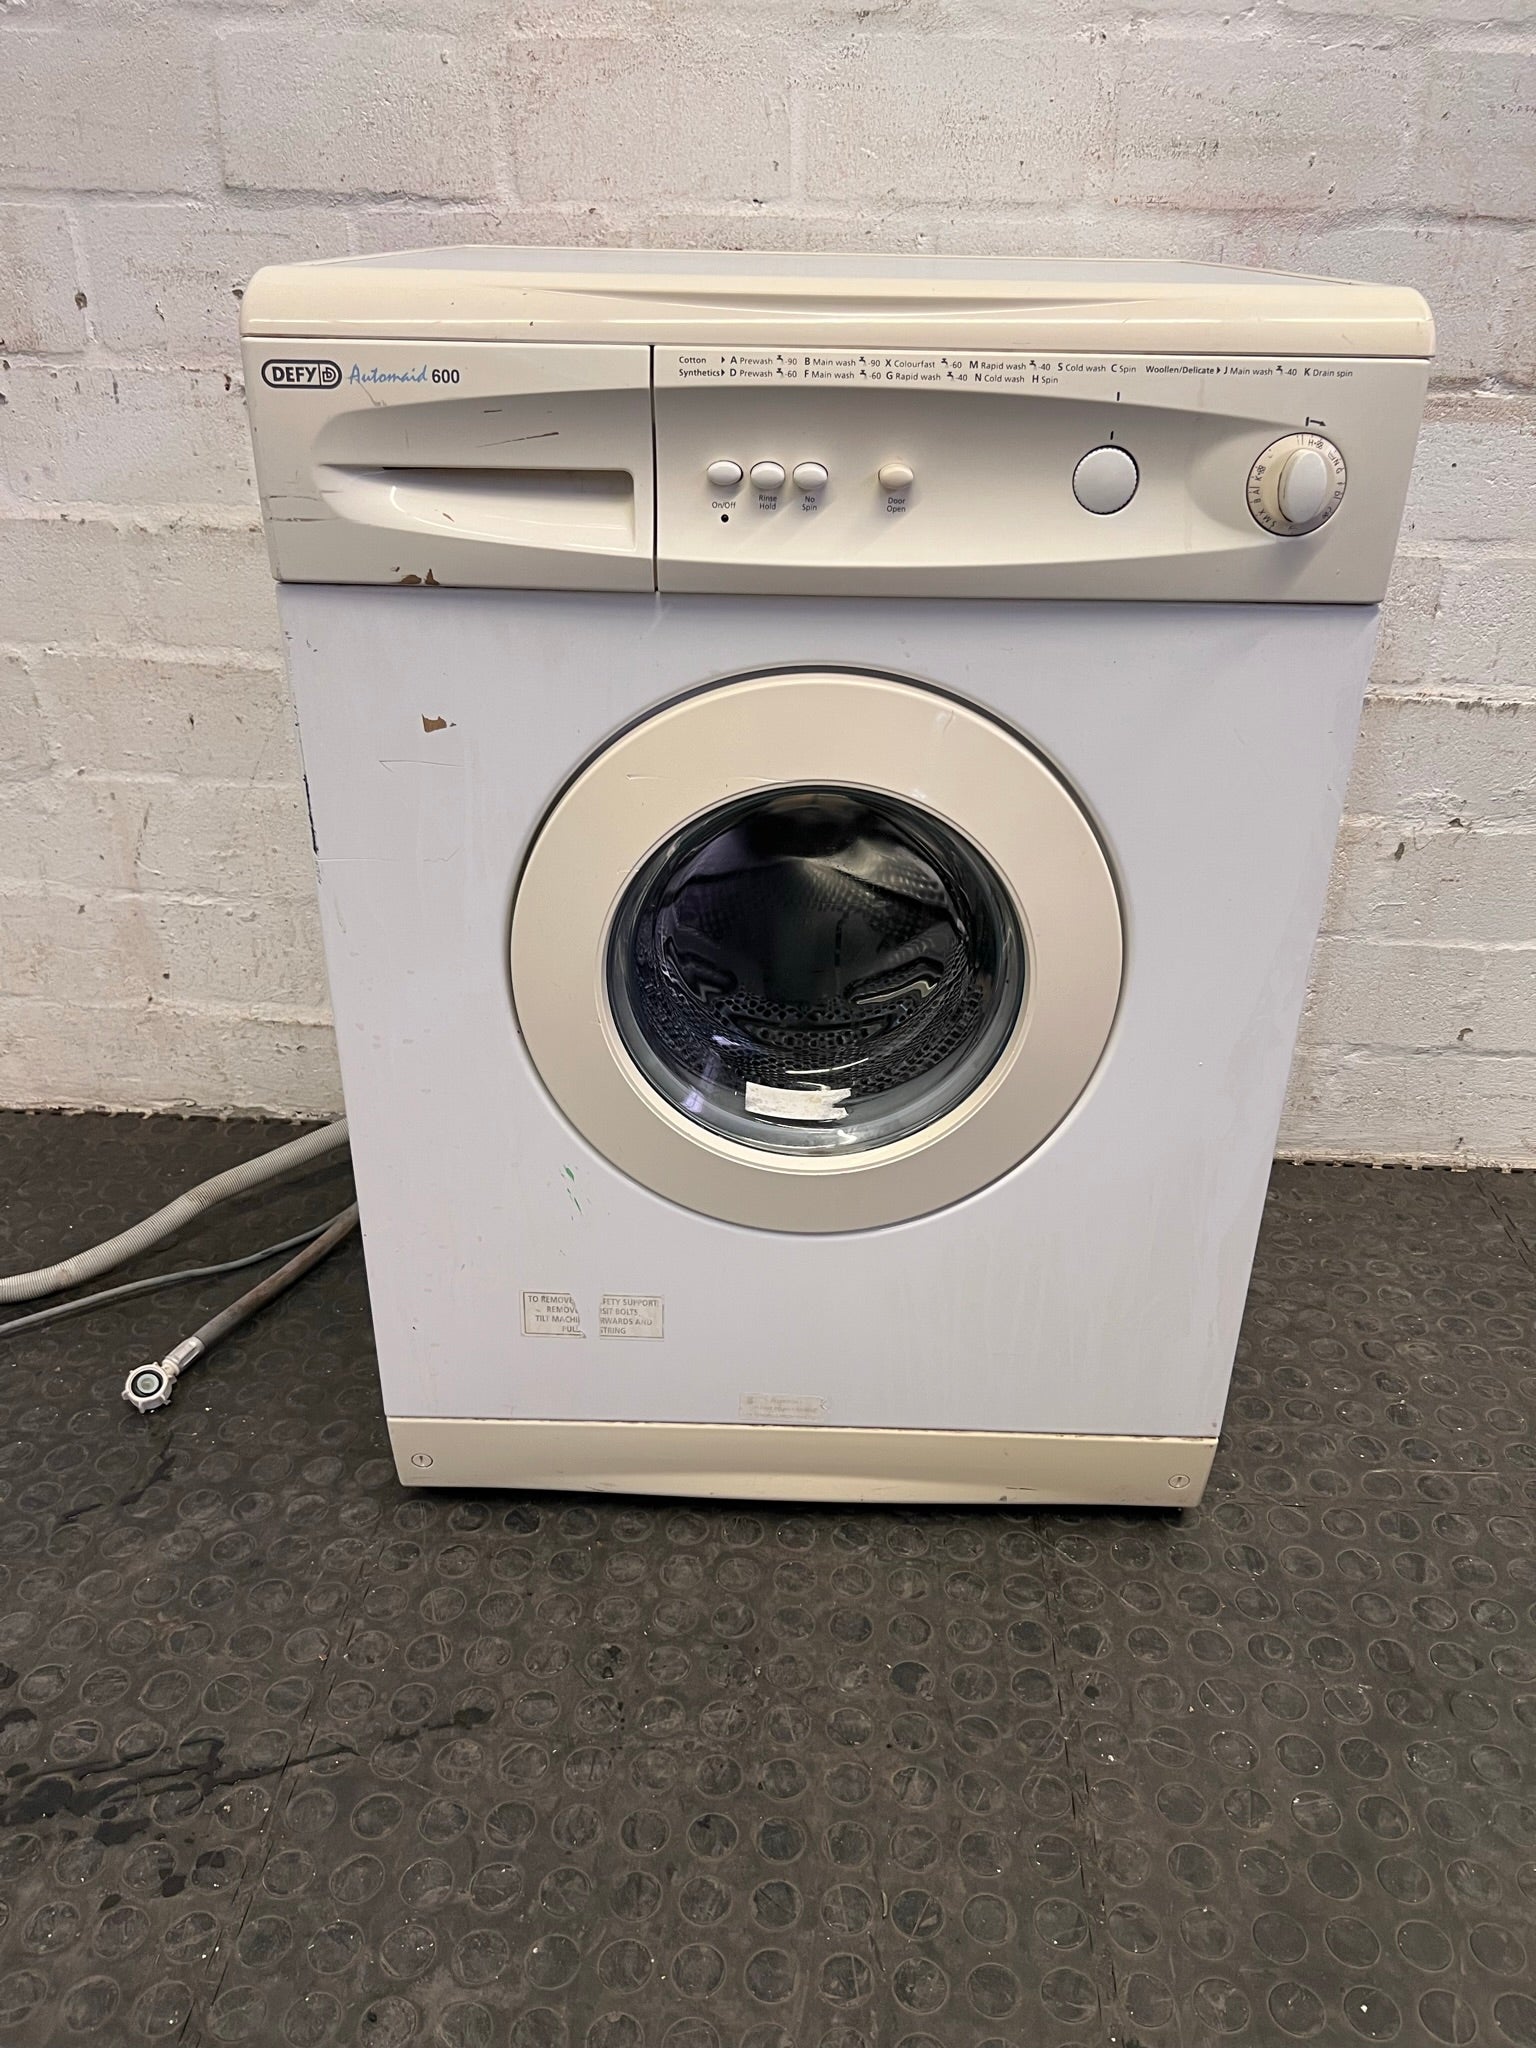 Defy Automaid 600 Front Loader Washing Machine (Automatic Function Not Working) - REDUCED